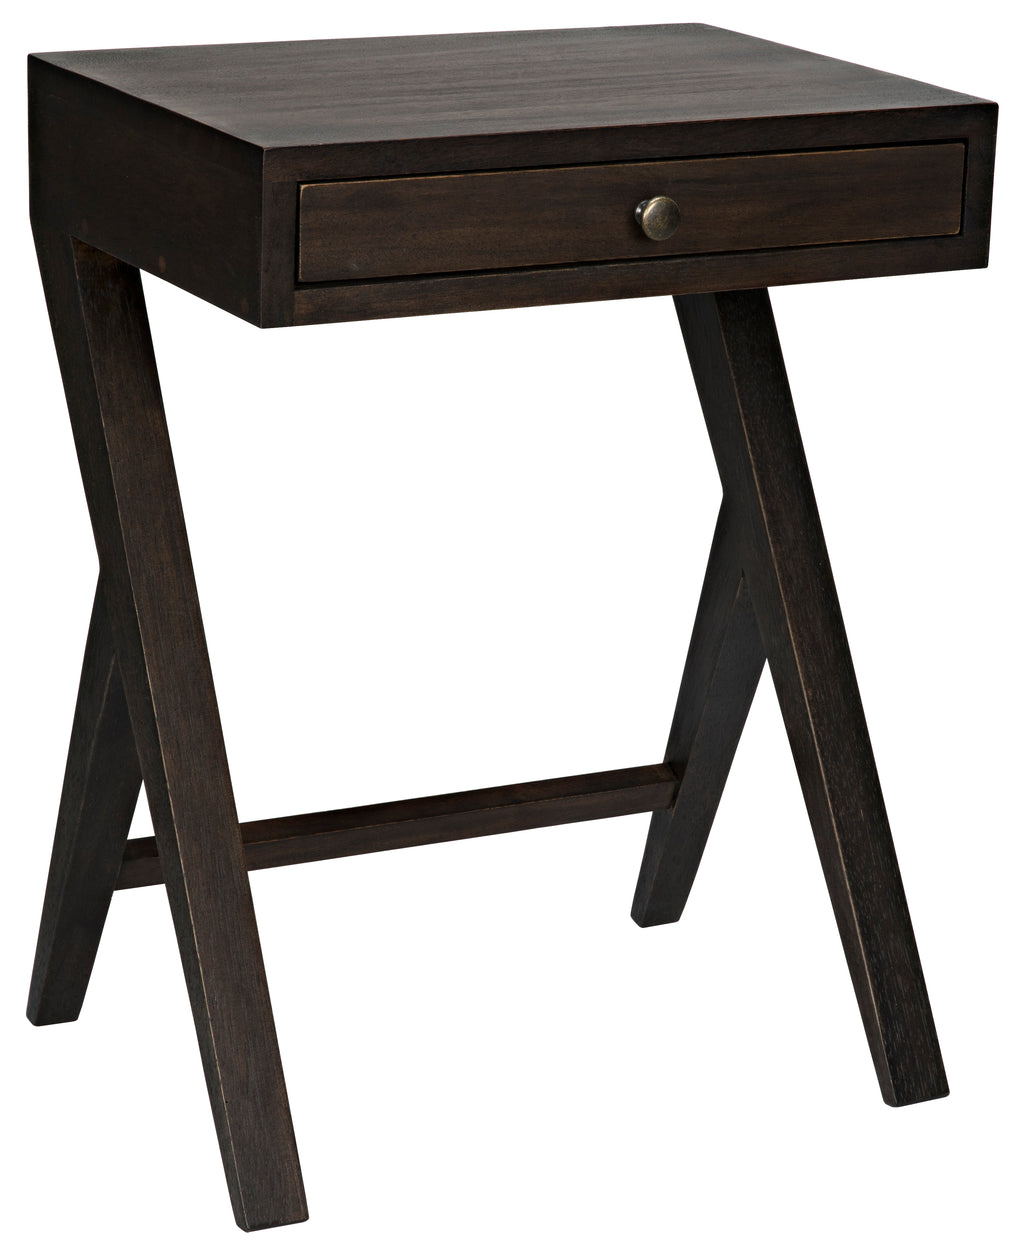 Peter Side Table - 3 Colors